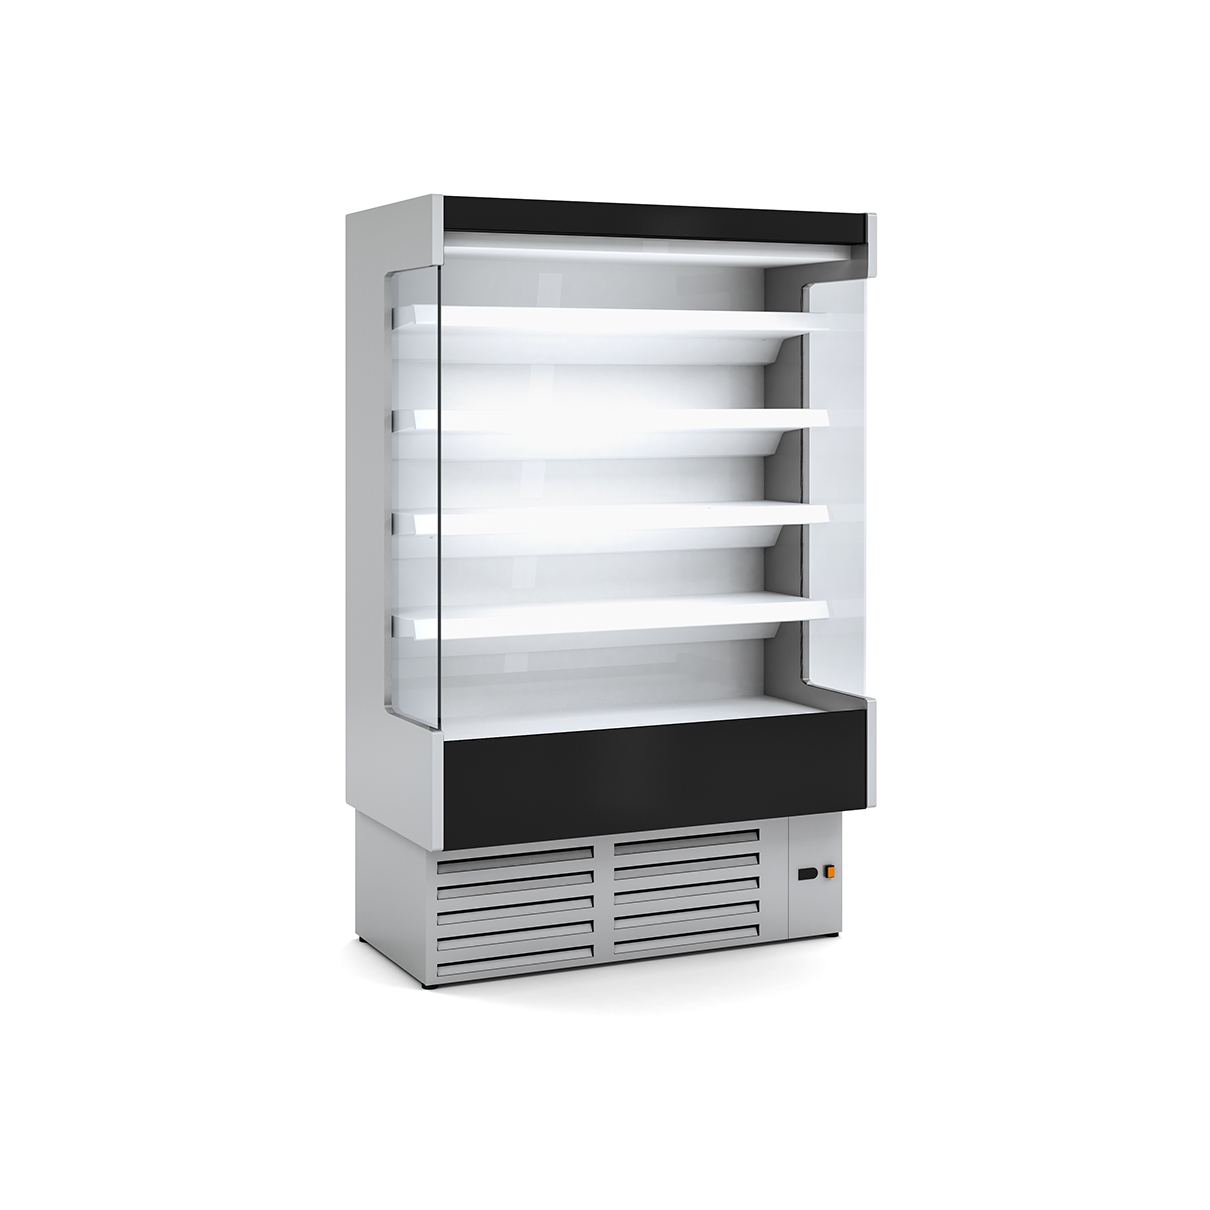 REFRIGERATED WALL CABINET DS3 M1-M2